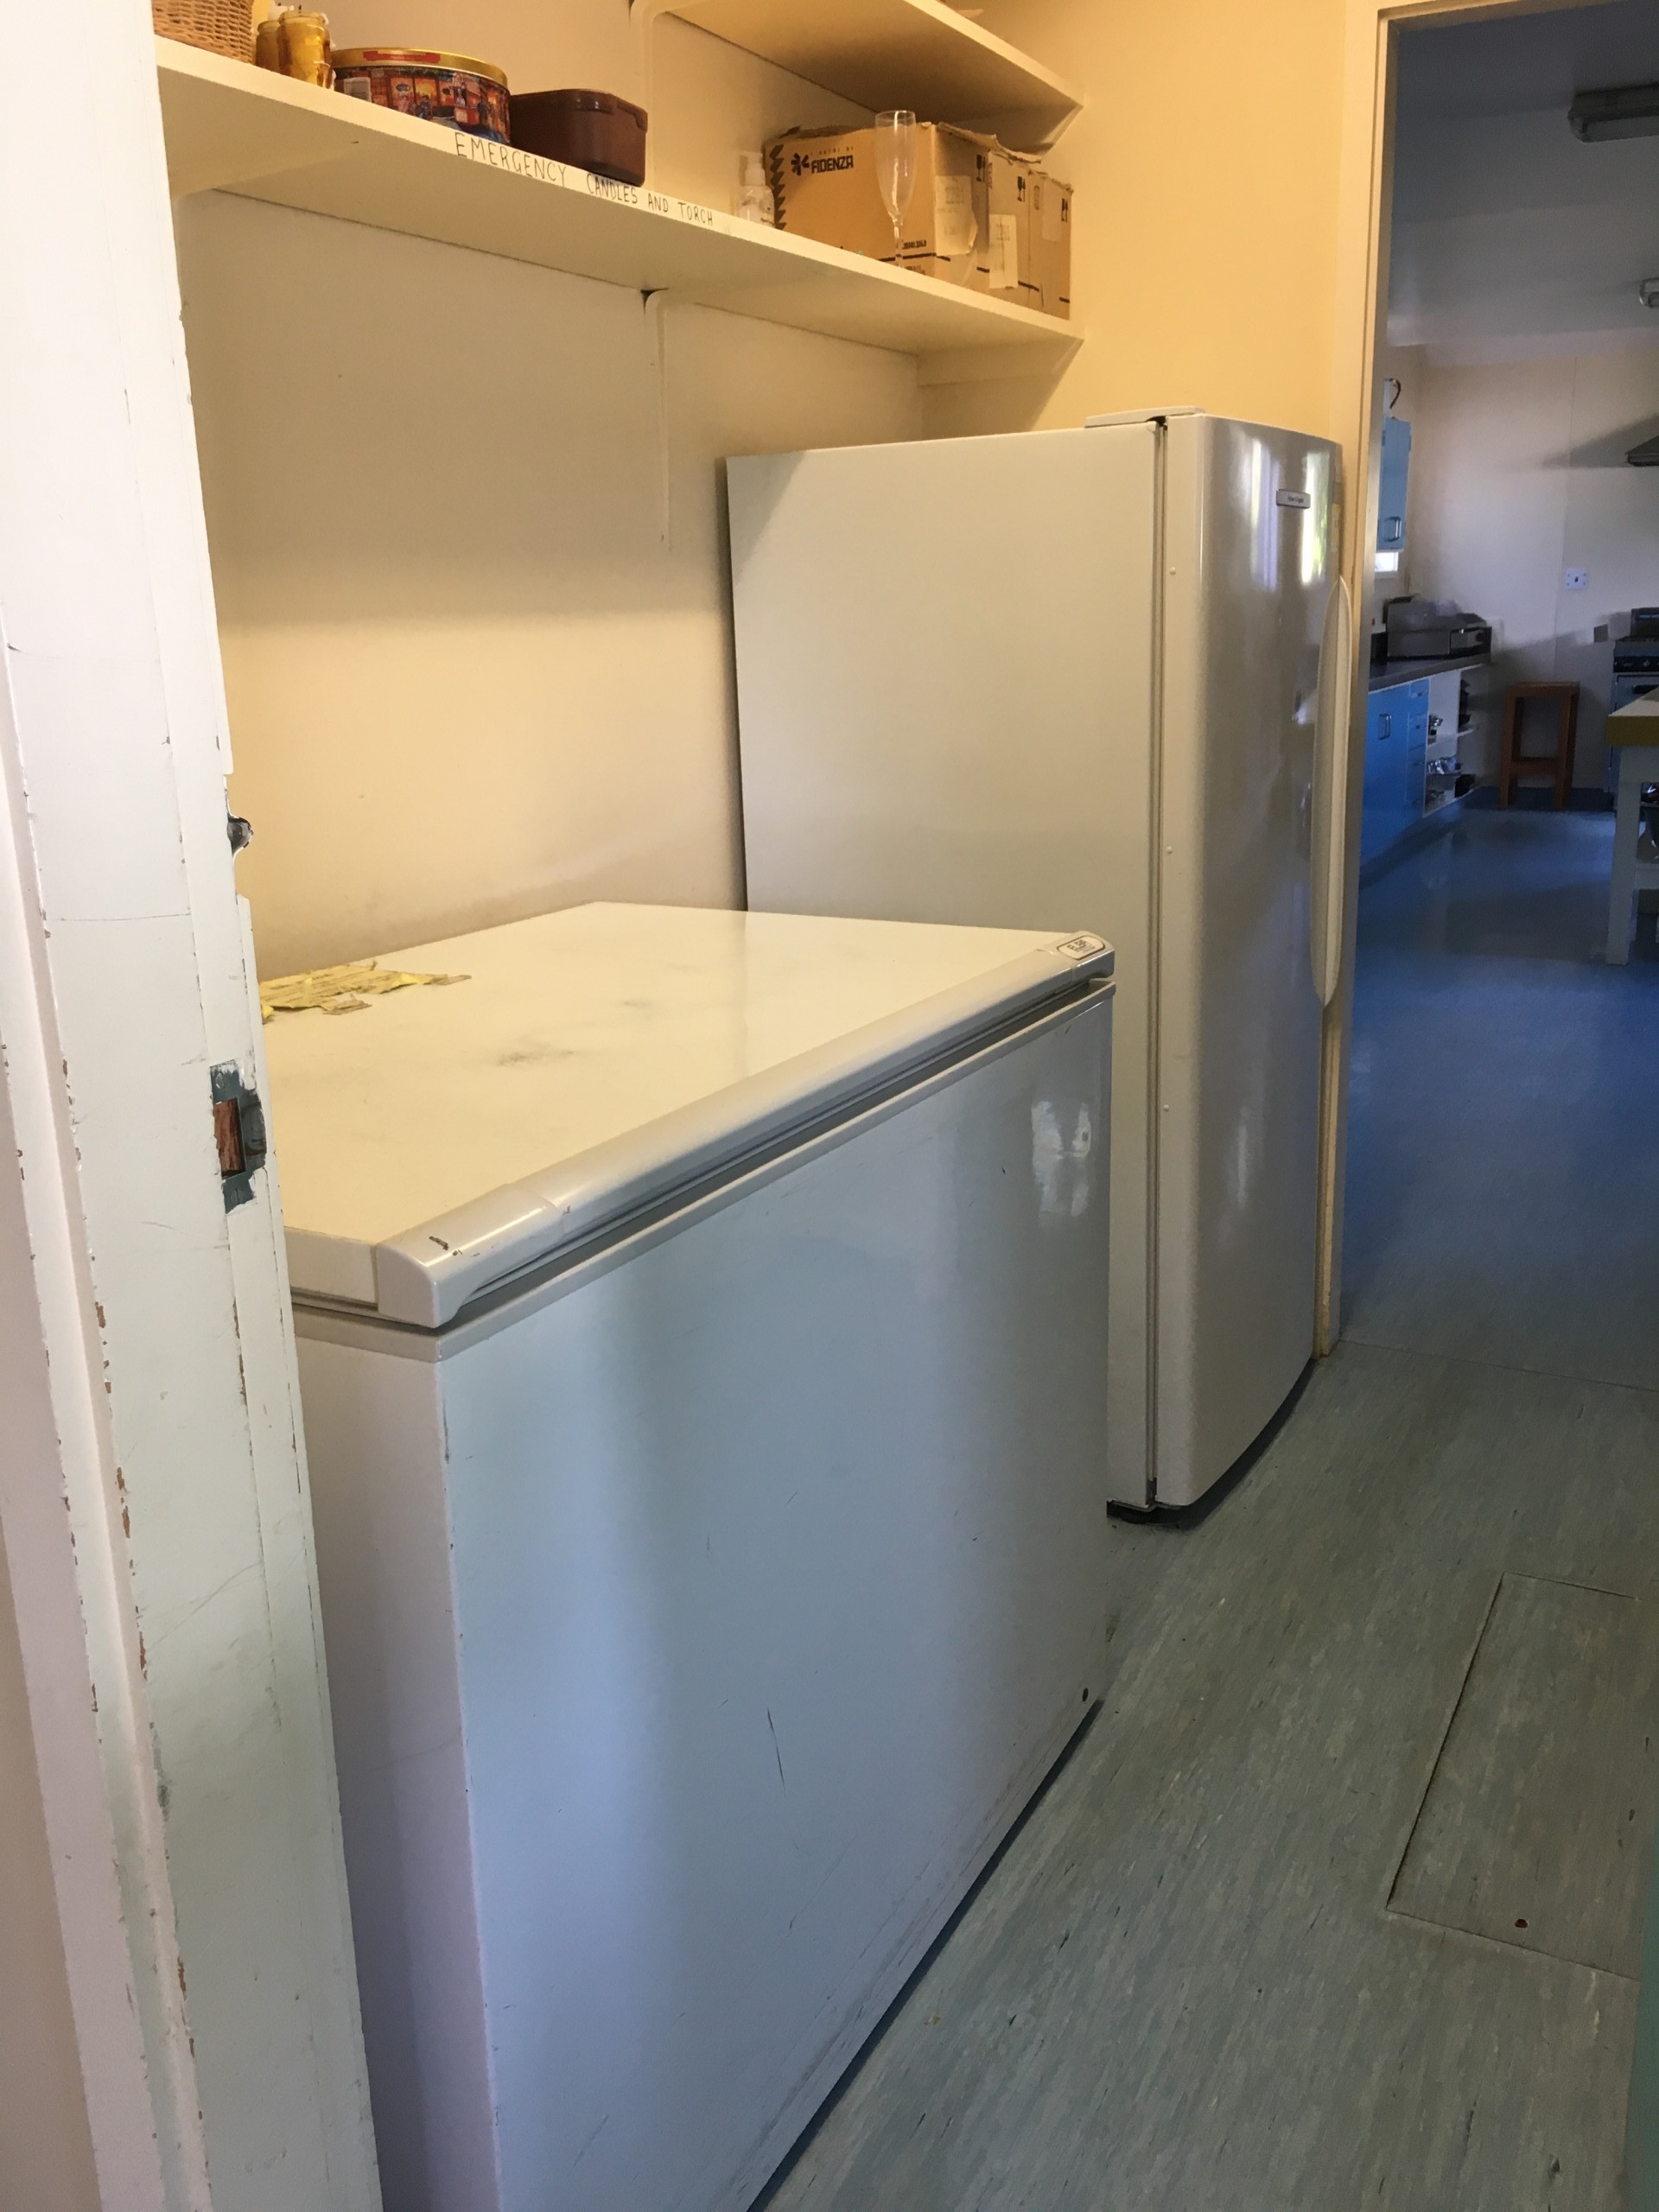 Chest freezer and upright freezer in the pantry